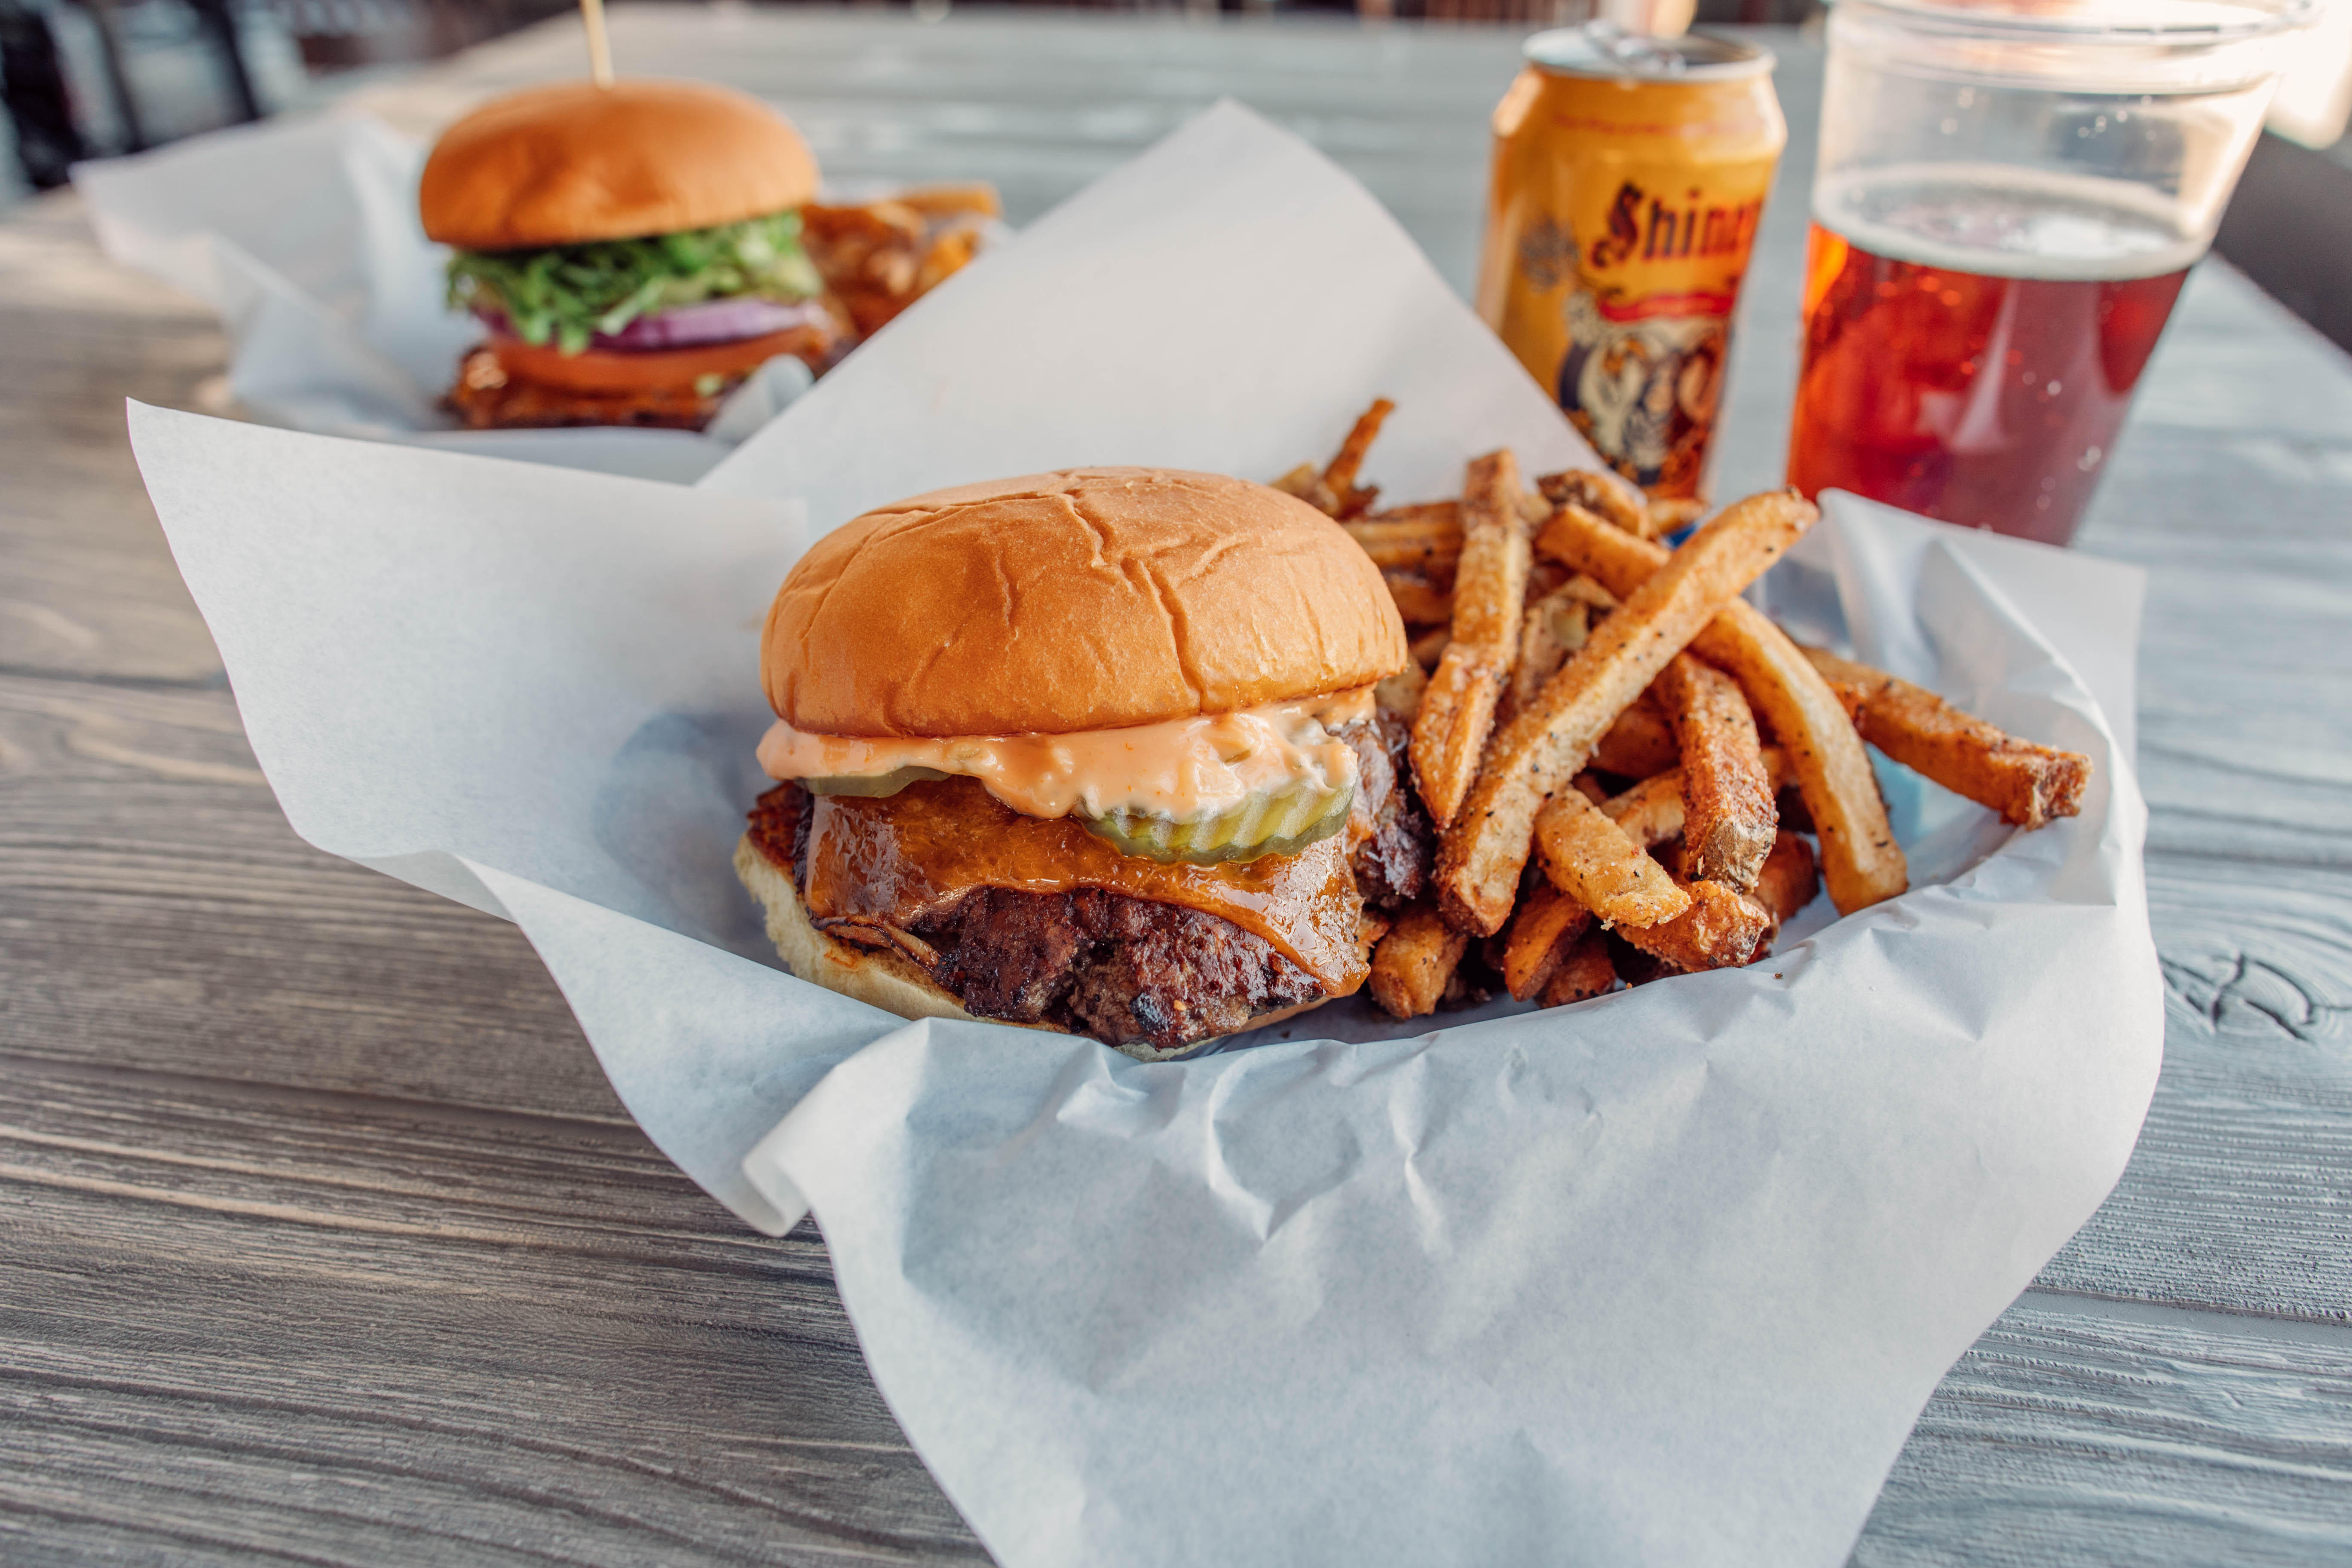 There's no greater combination than burgers and beers lakeside!